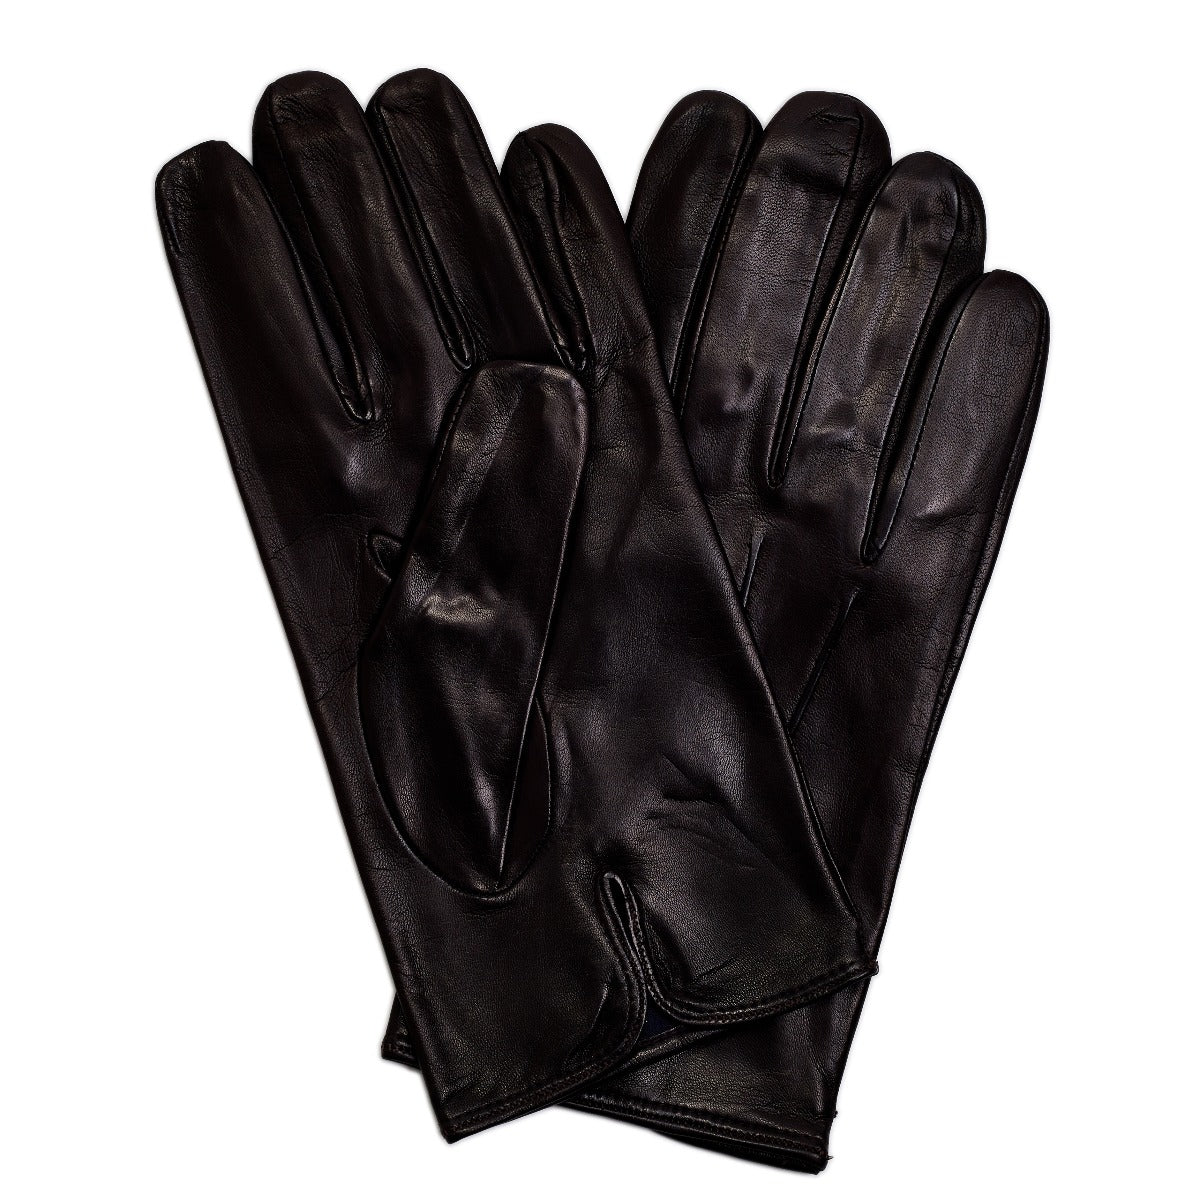 A pair of ultra-soft Sovereign Grade Dark Brown Nappa Leather Gloves, Silk Lined by KirbyAllison.com on a white background.